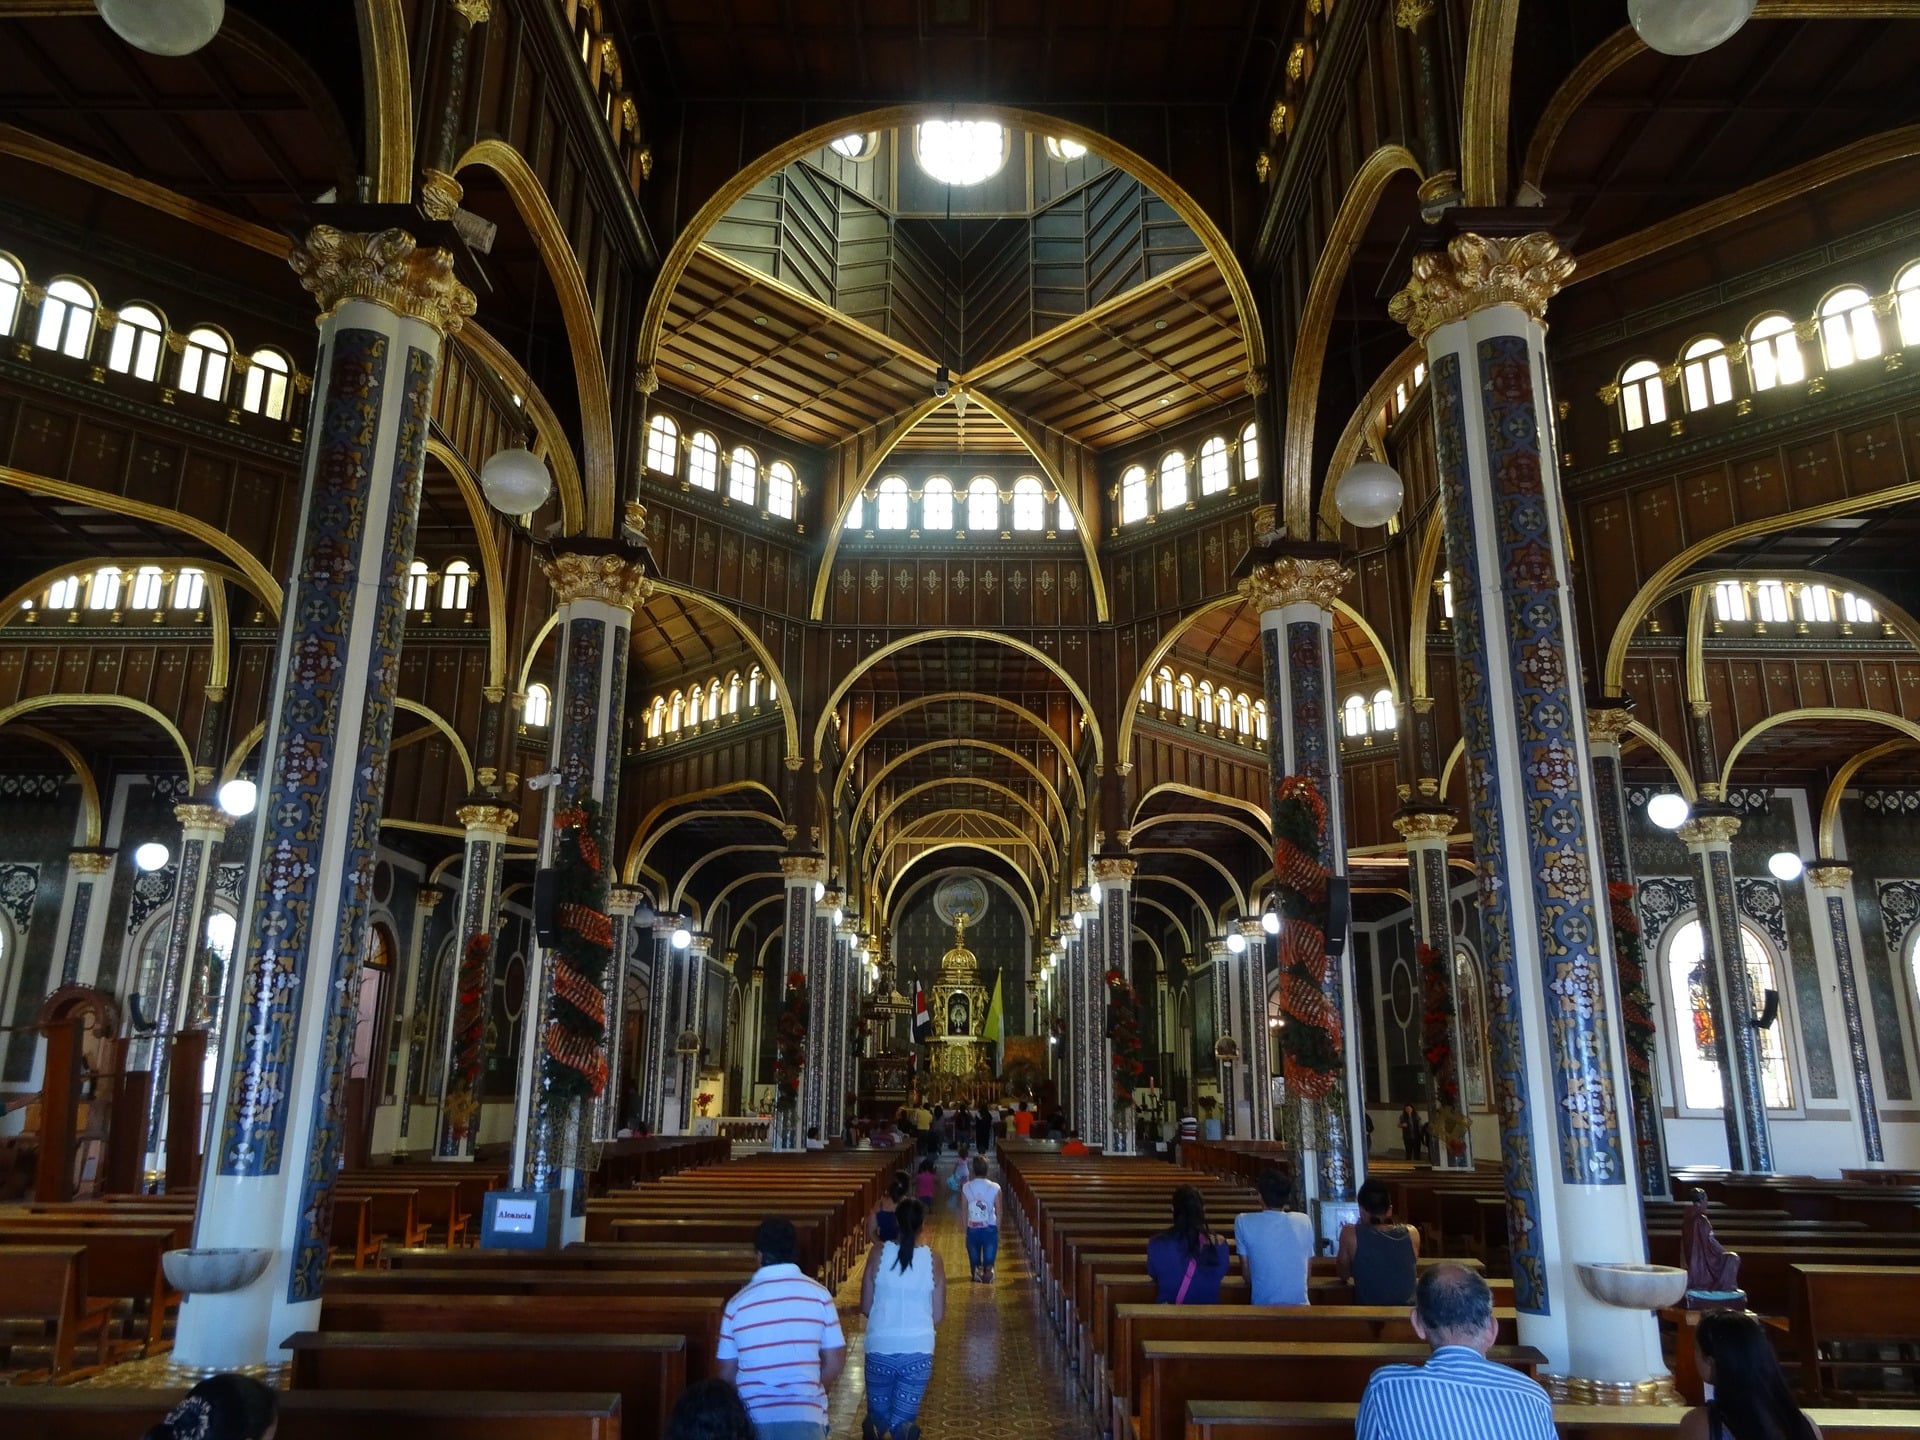 Where to stay in Costa Rica for incredible churches? Cartago